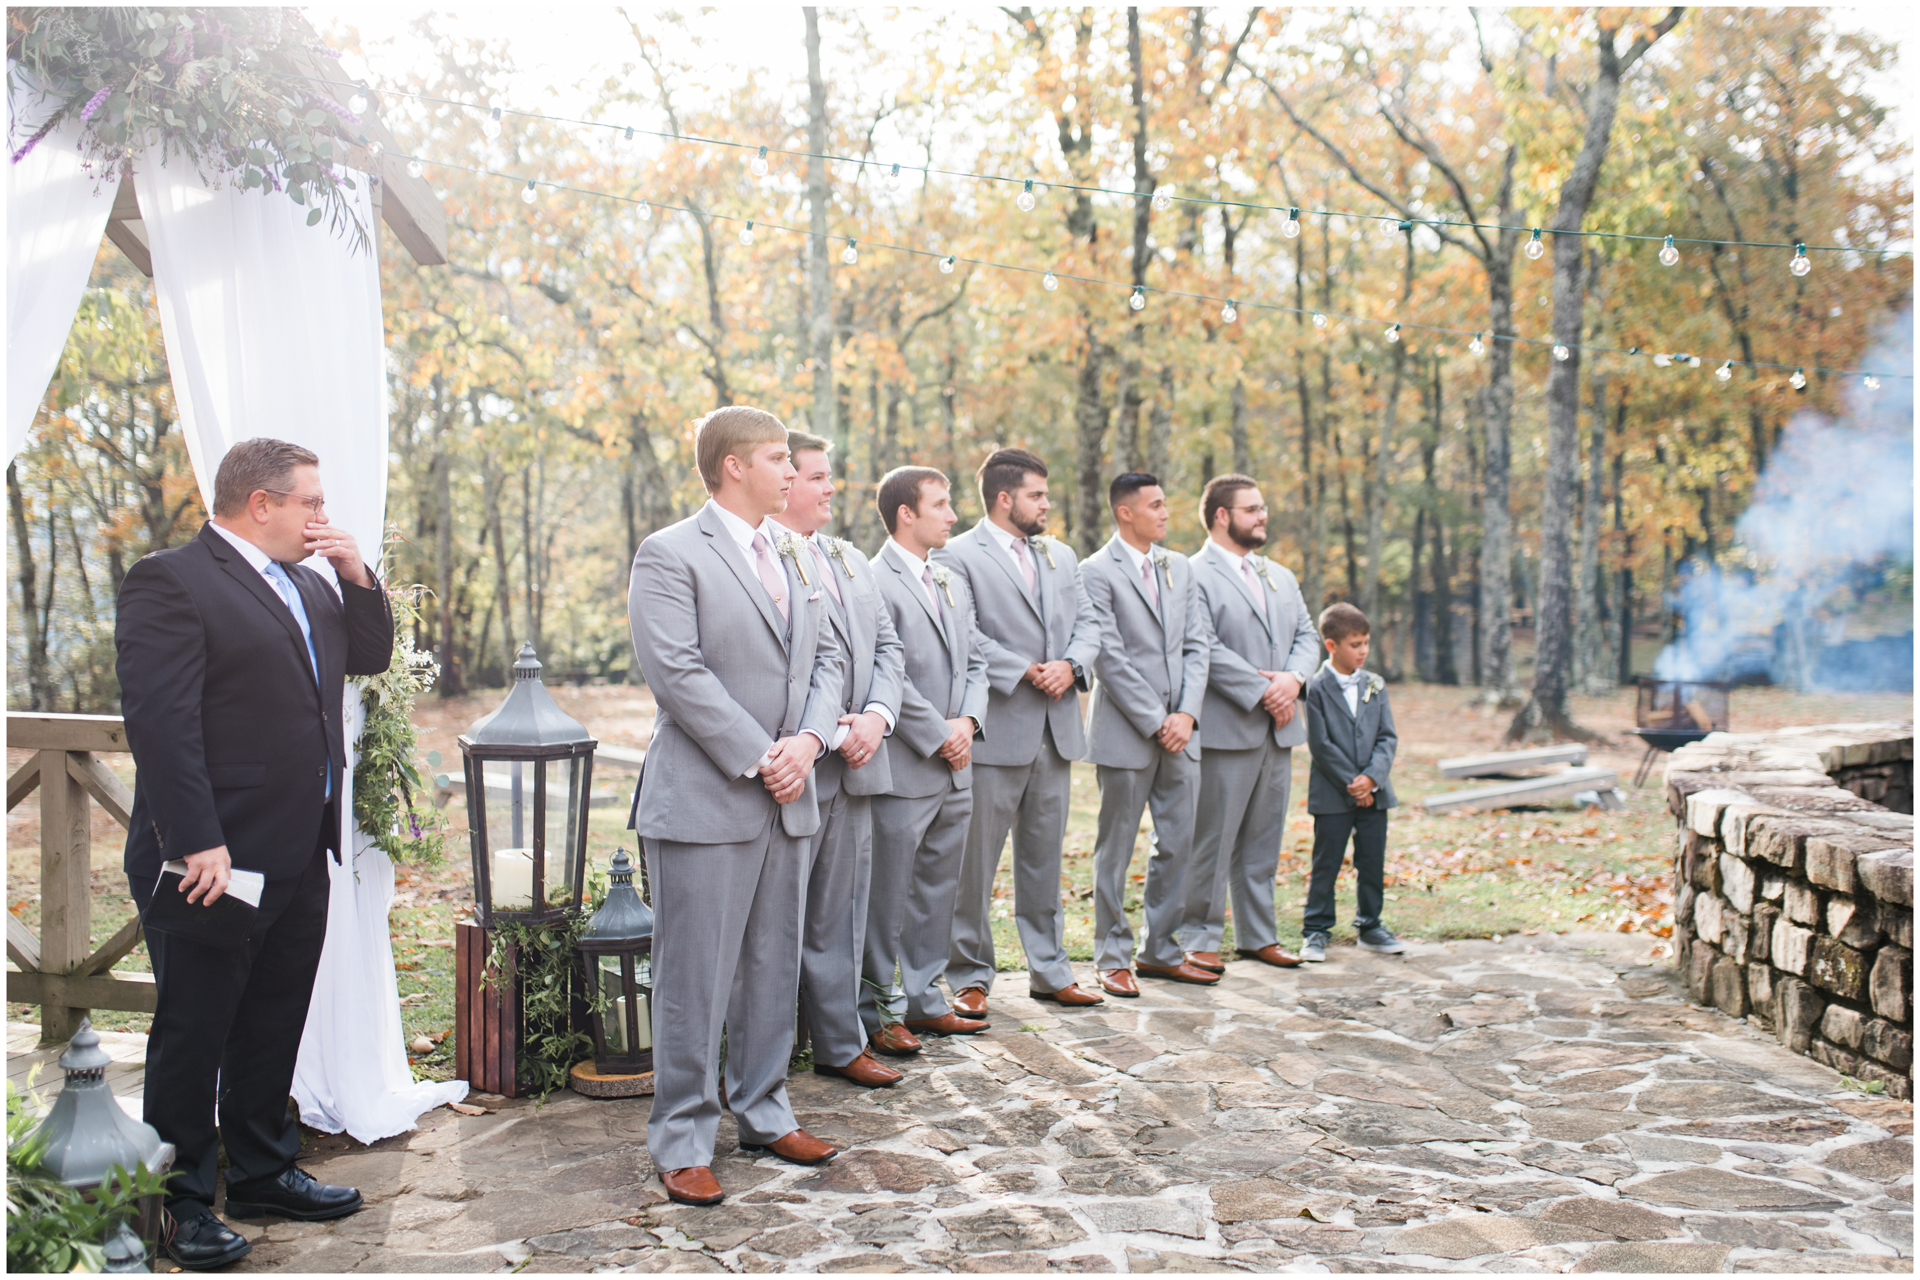 Monte Sano Lodge Fall Wedding Outdoor Ceremony in the Fall Autumn Colors Firepits Groom waiting for Bride